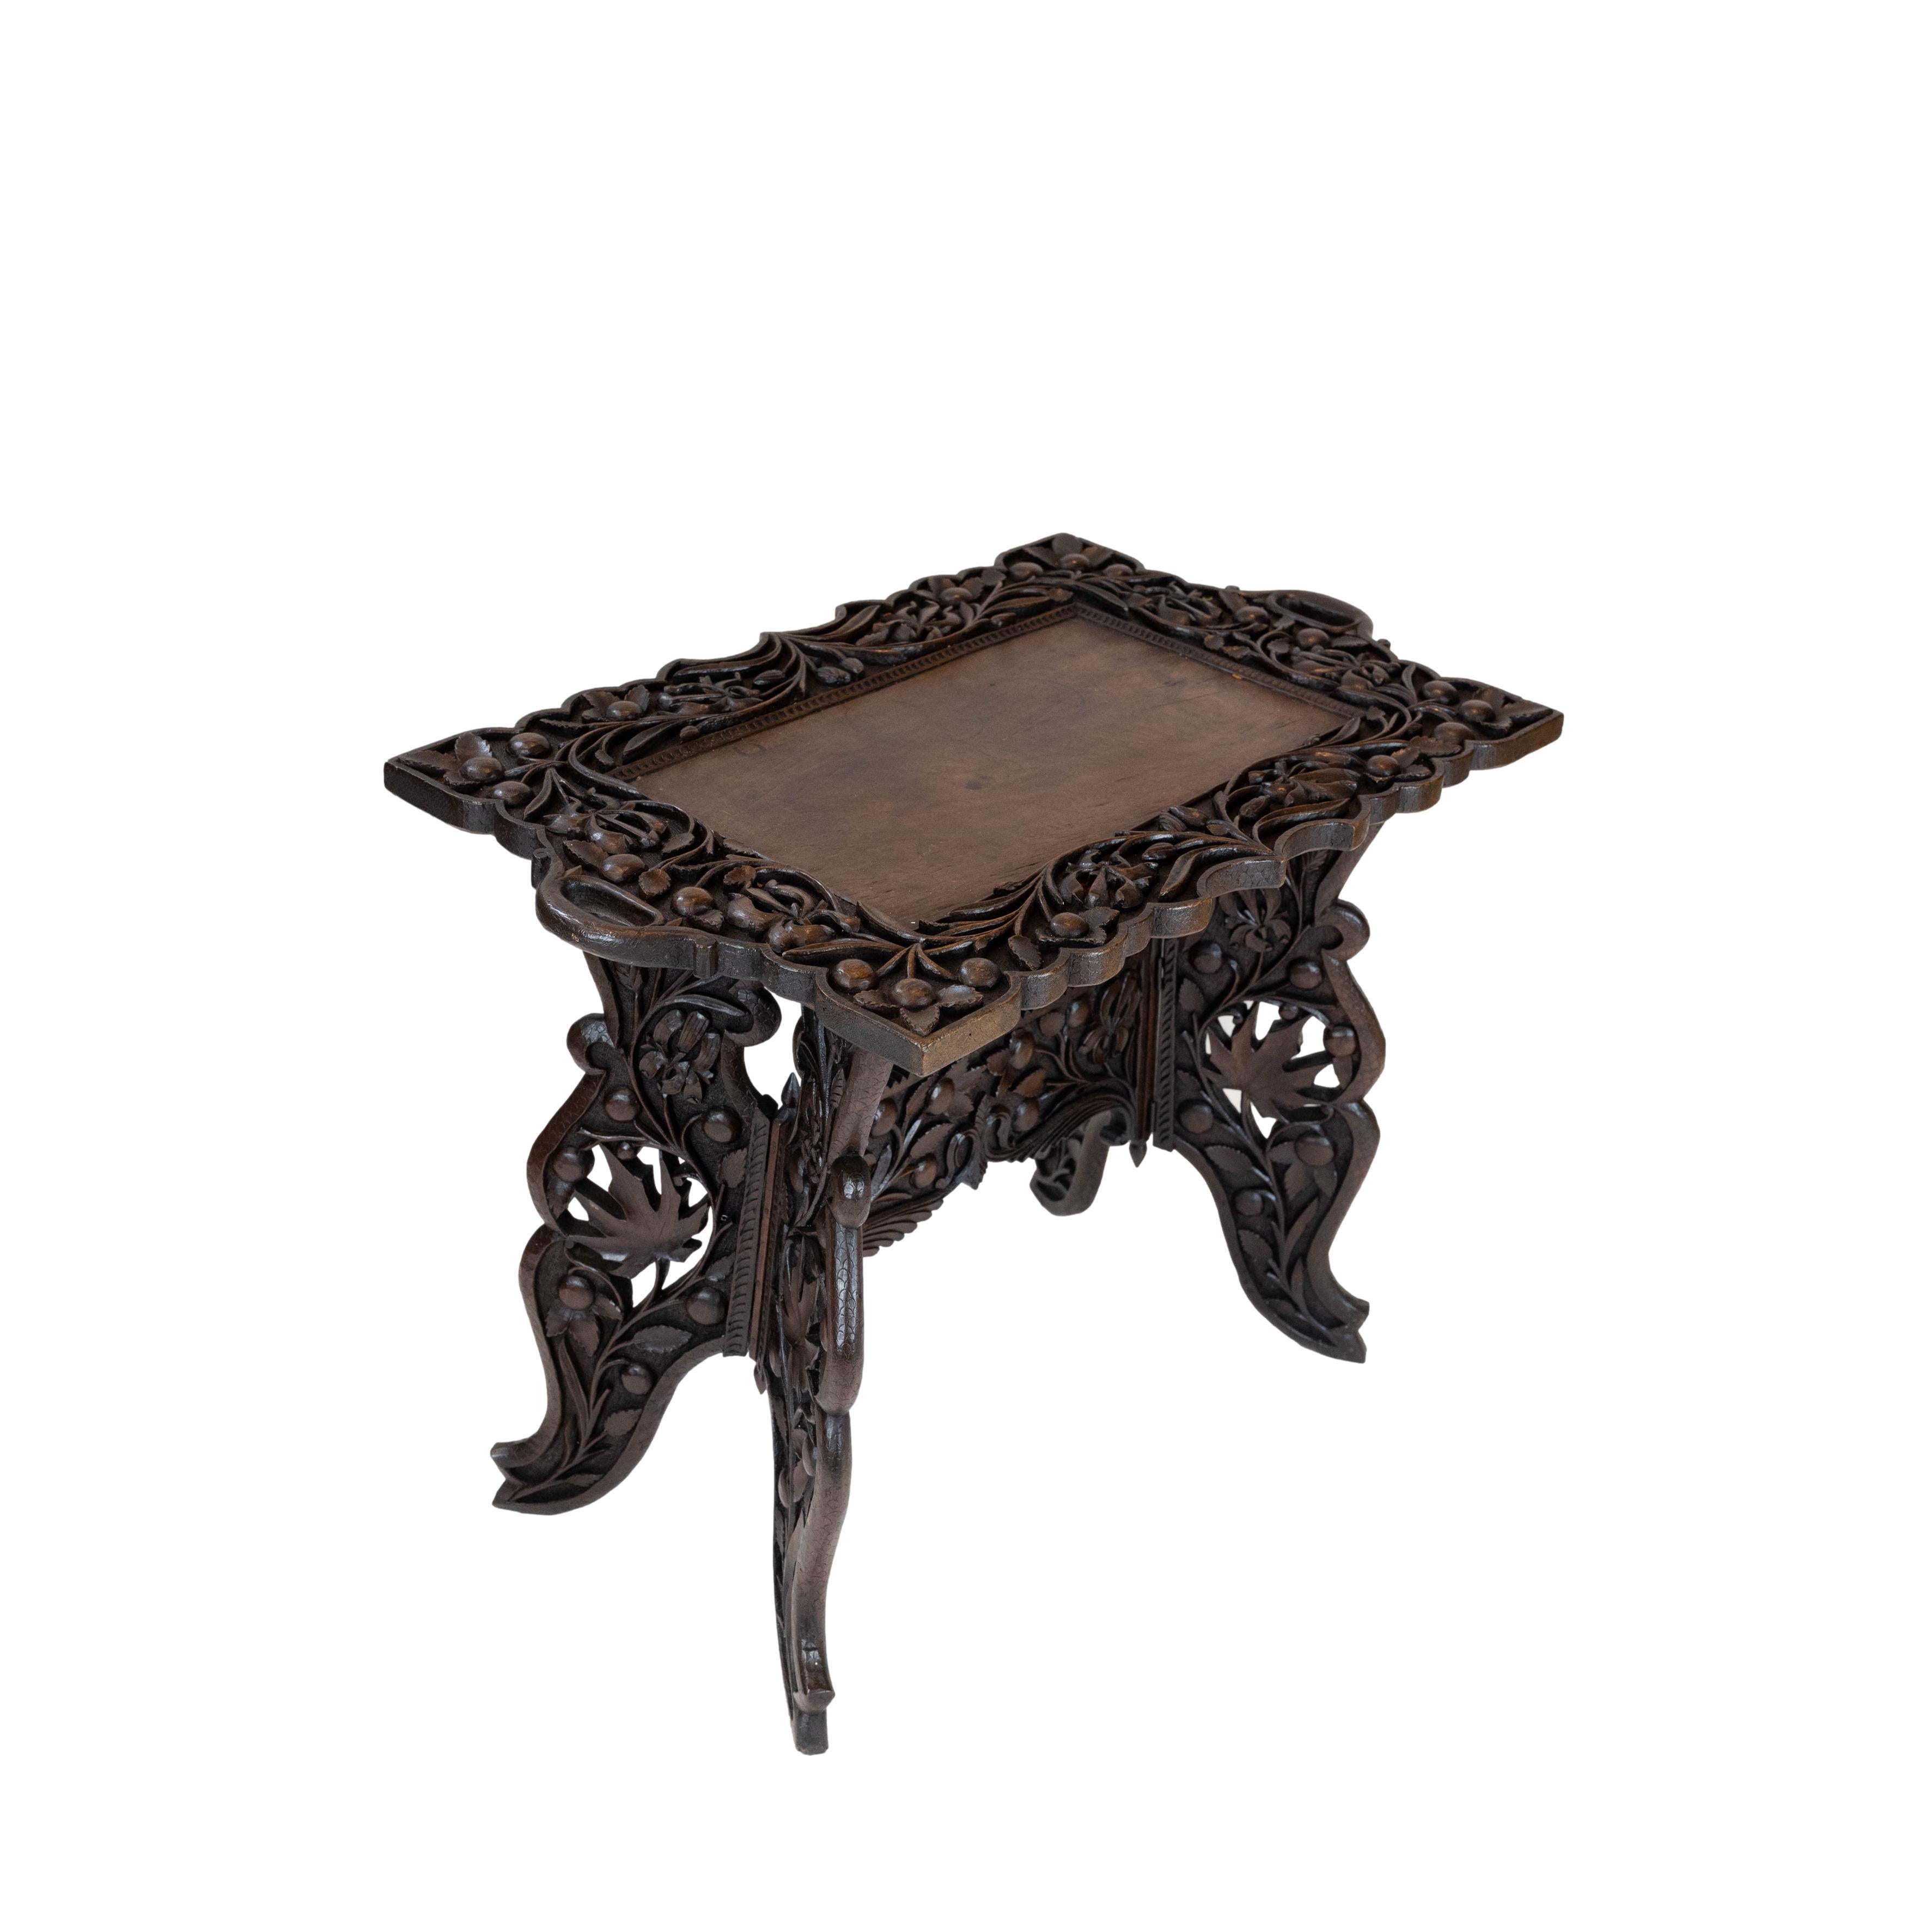 19th Century Elaborately Hand-Carved Solid Walnut Campaign Tray-Top Table, English, ca. 1890